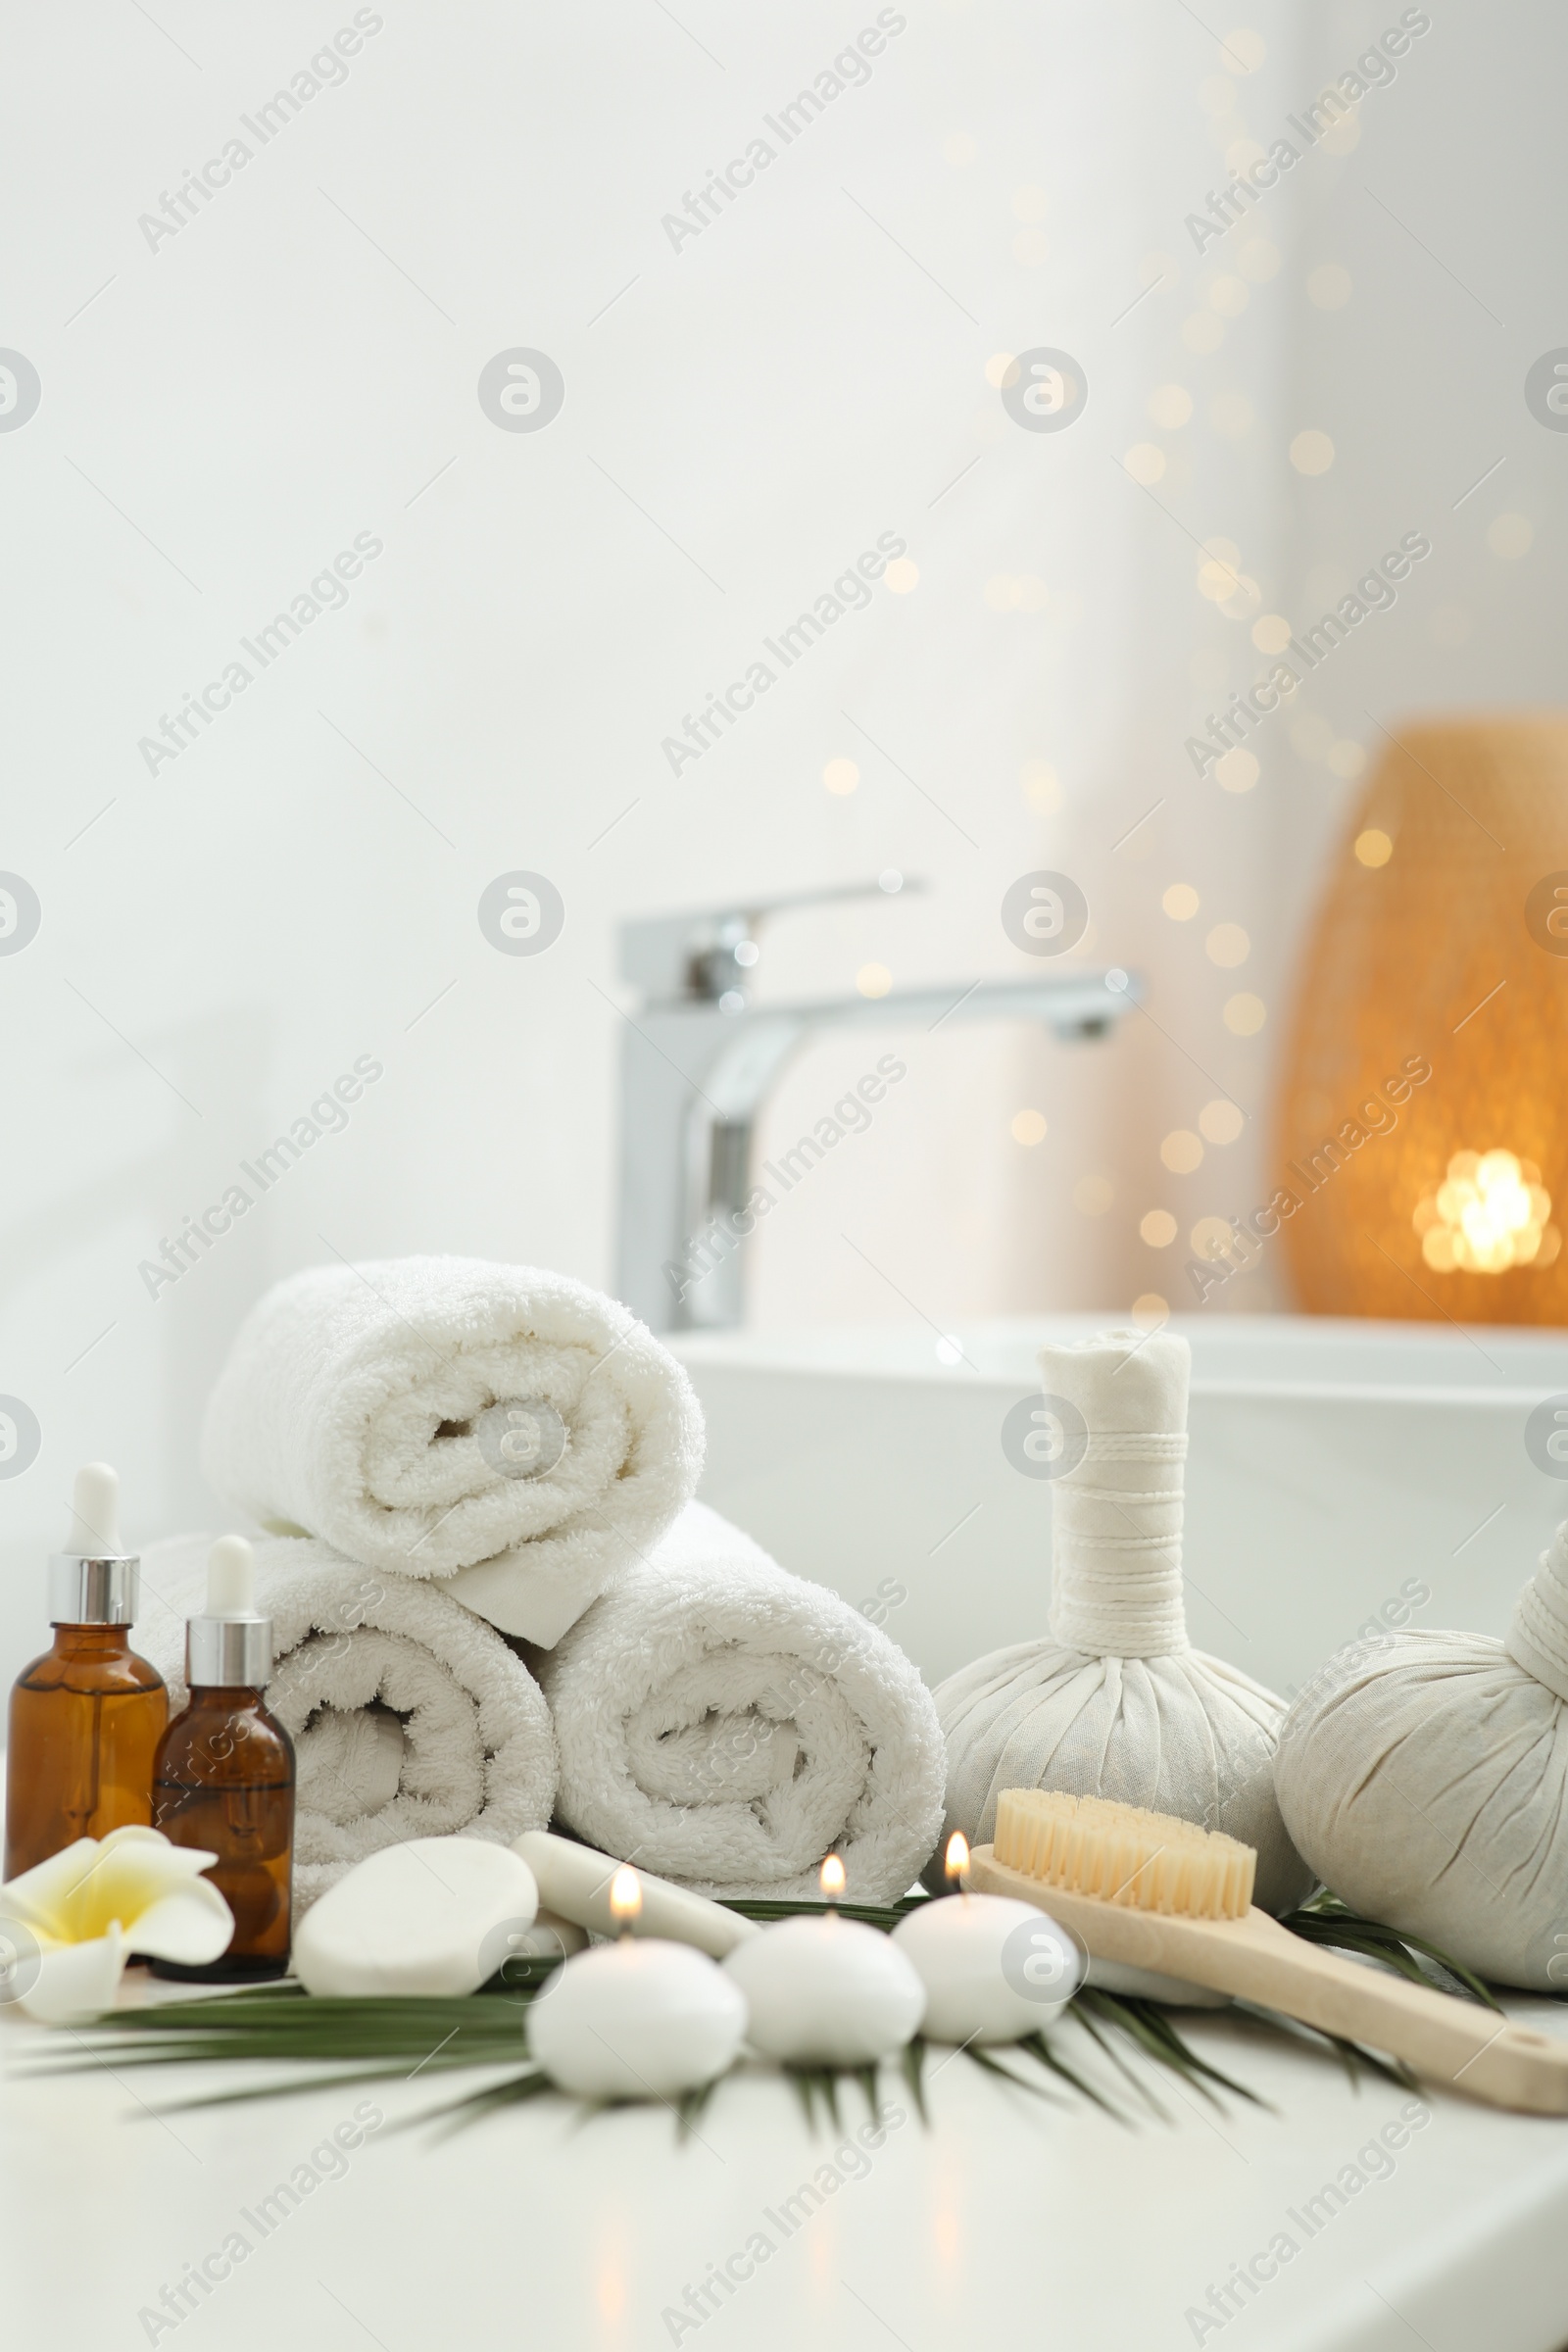 Photo of Spa composition. Rolled towels, herbal bags, cosmetic products and burning candles on white countertop in bathroom